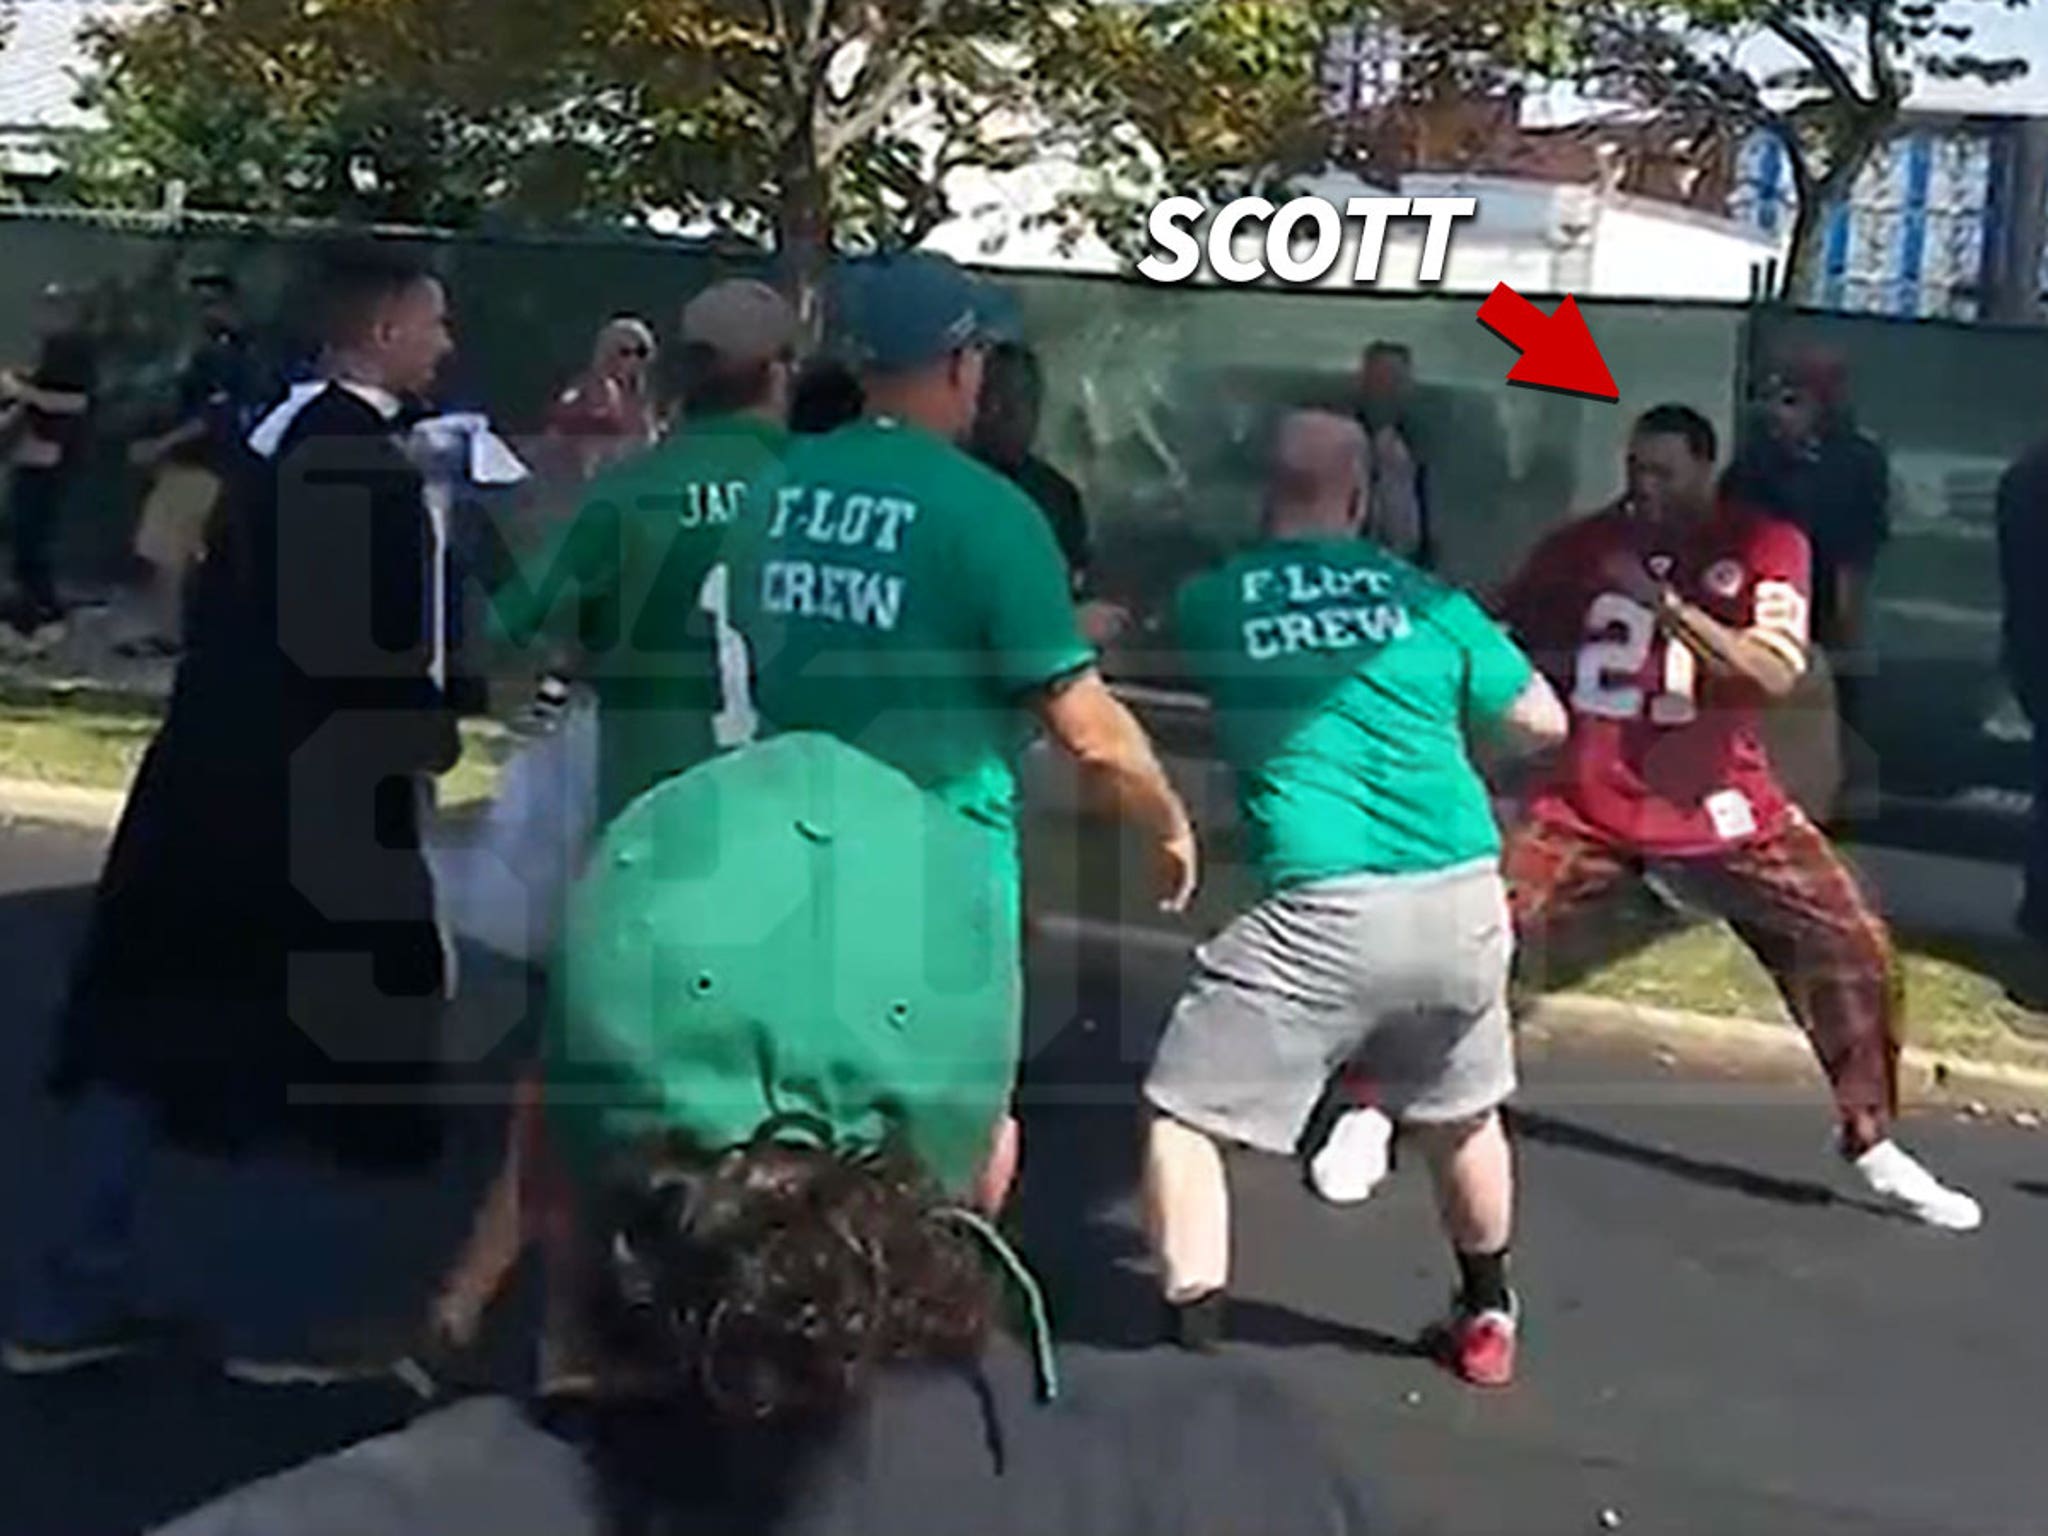 New Mike Scott Brawl Video Shows Crazy Haymakers With Eagles Fans